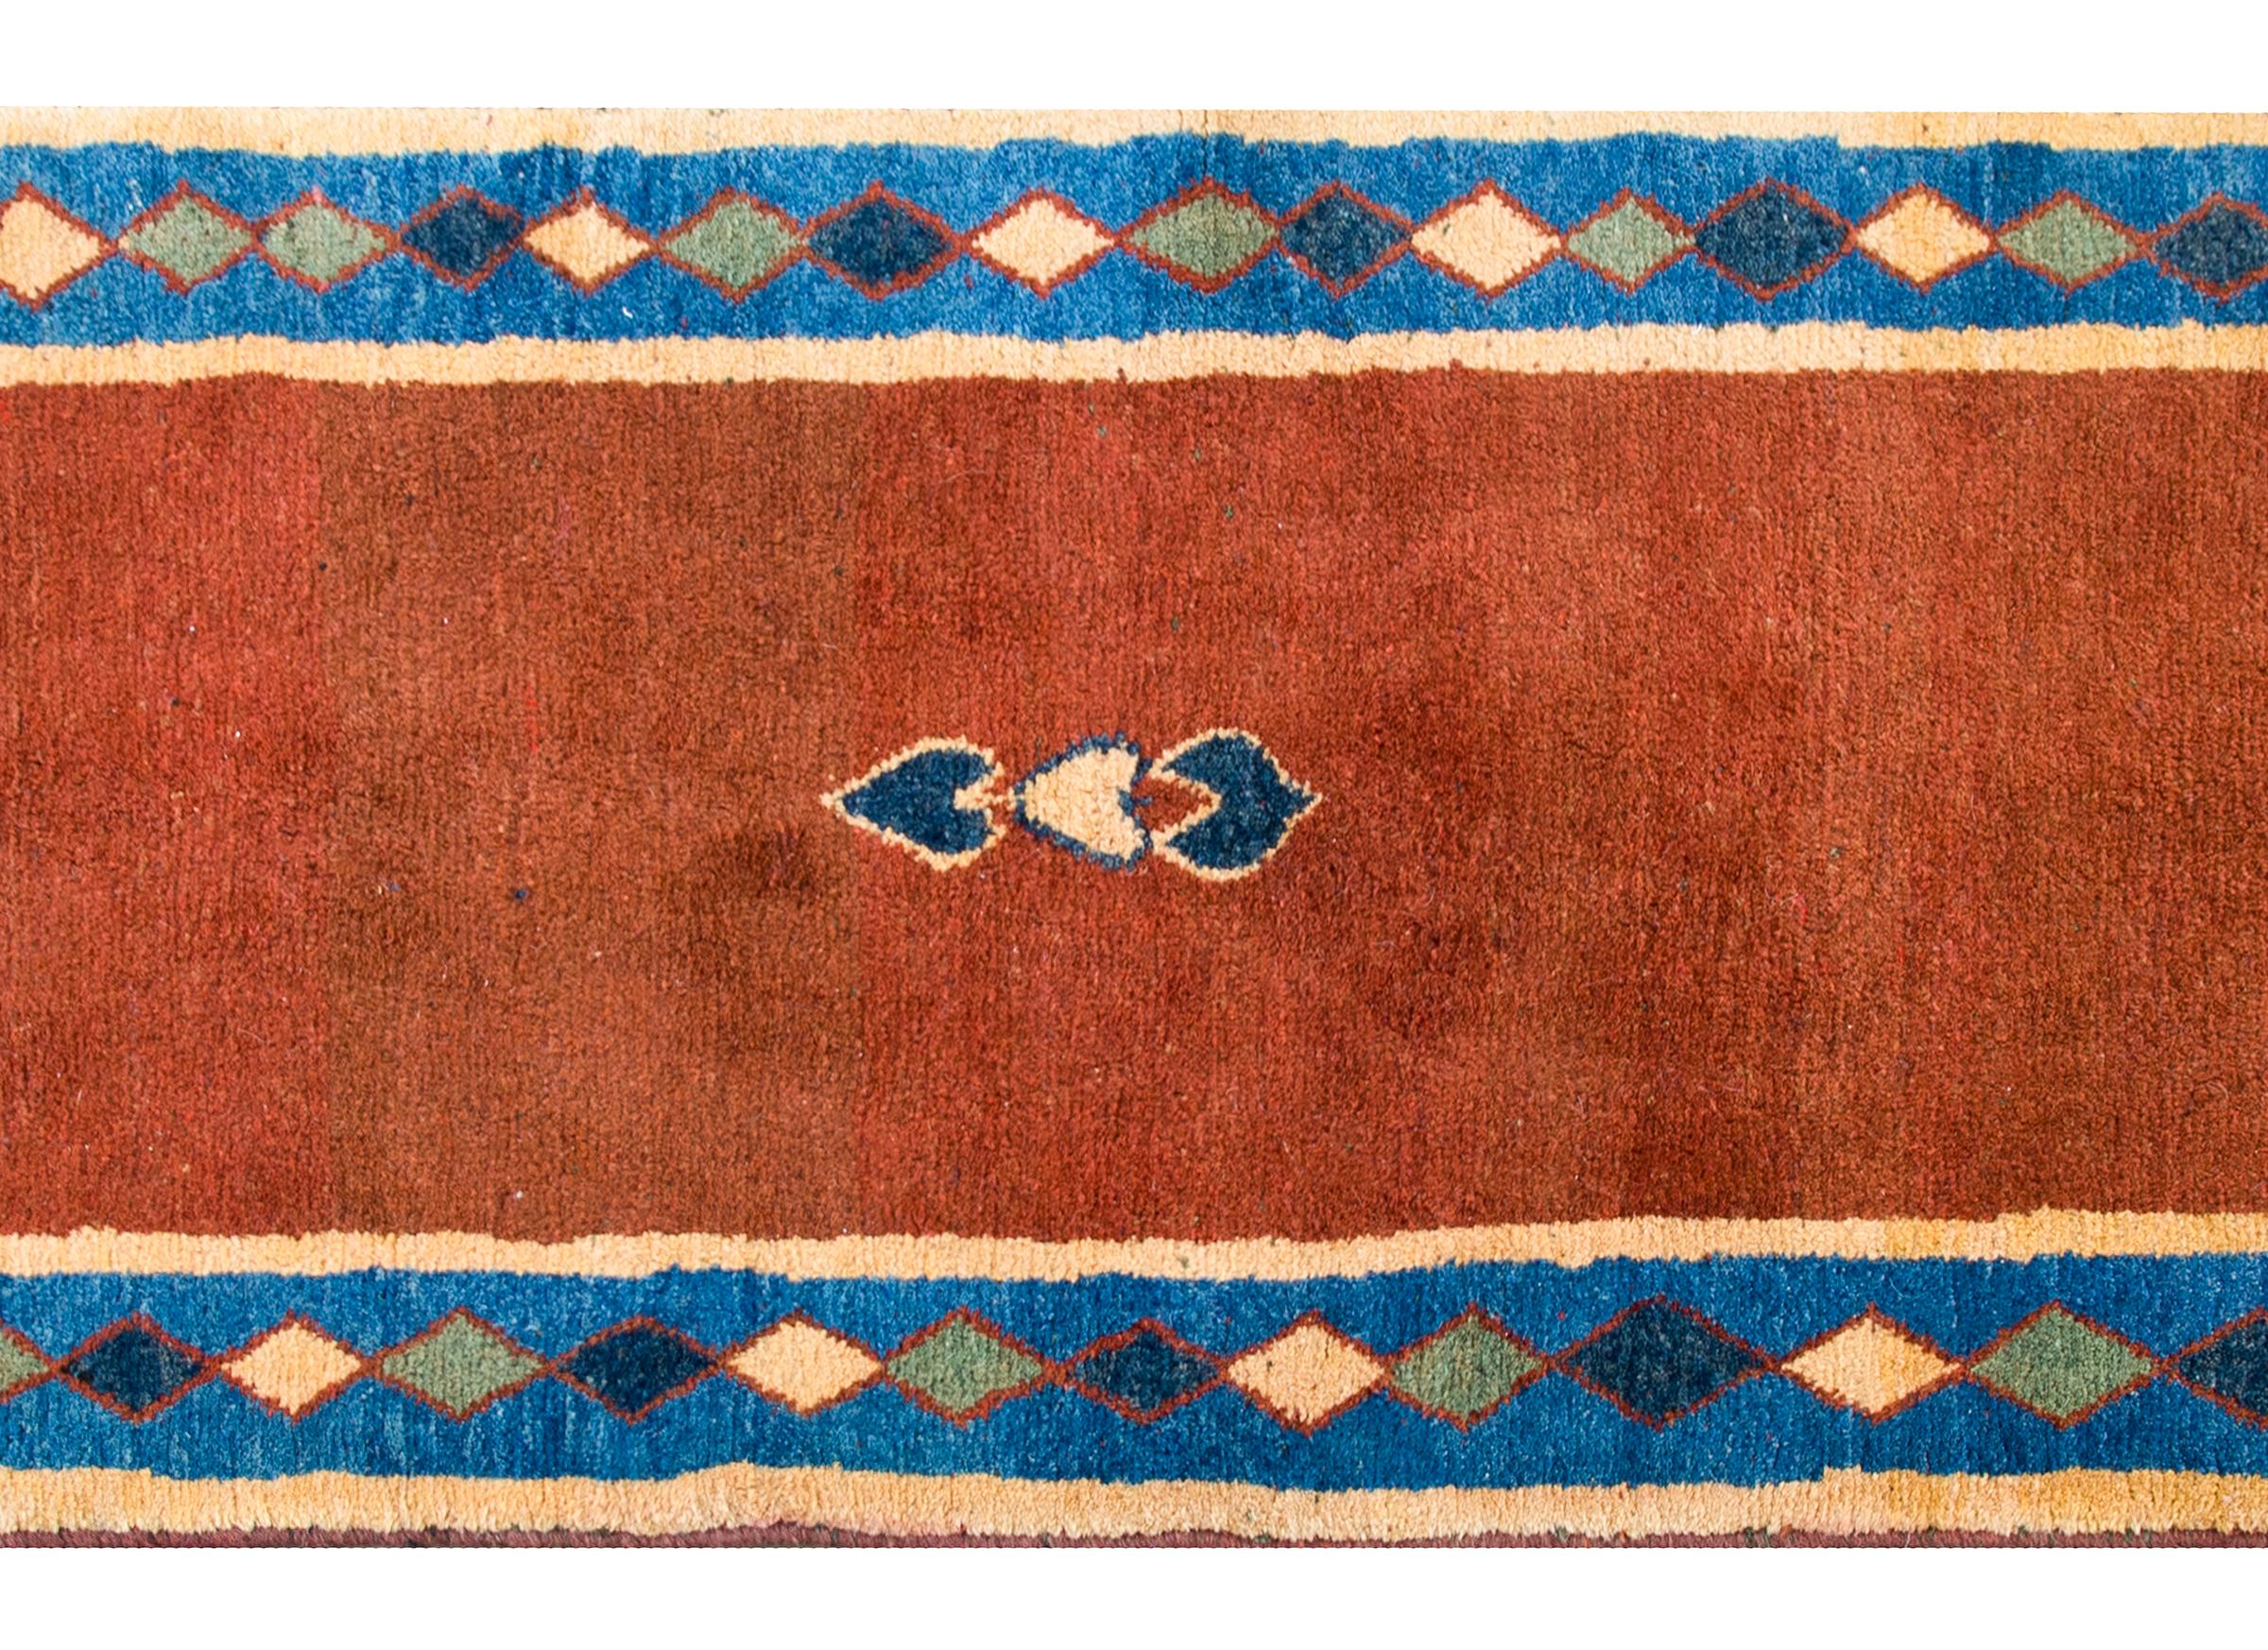 A fantastic mid-20th century Persian Gabbeh rug with a burnt orange field with three small stylized leaves in the center, and surrounded by a harlequin diamond border woven in indigo, gold, green, and a thin red line stripe.